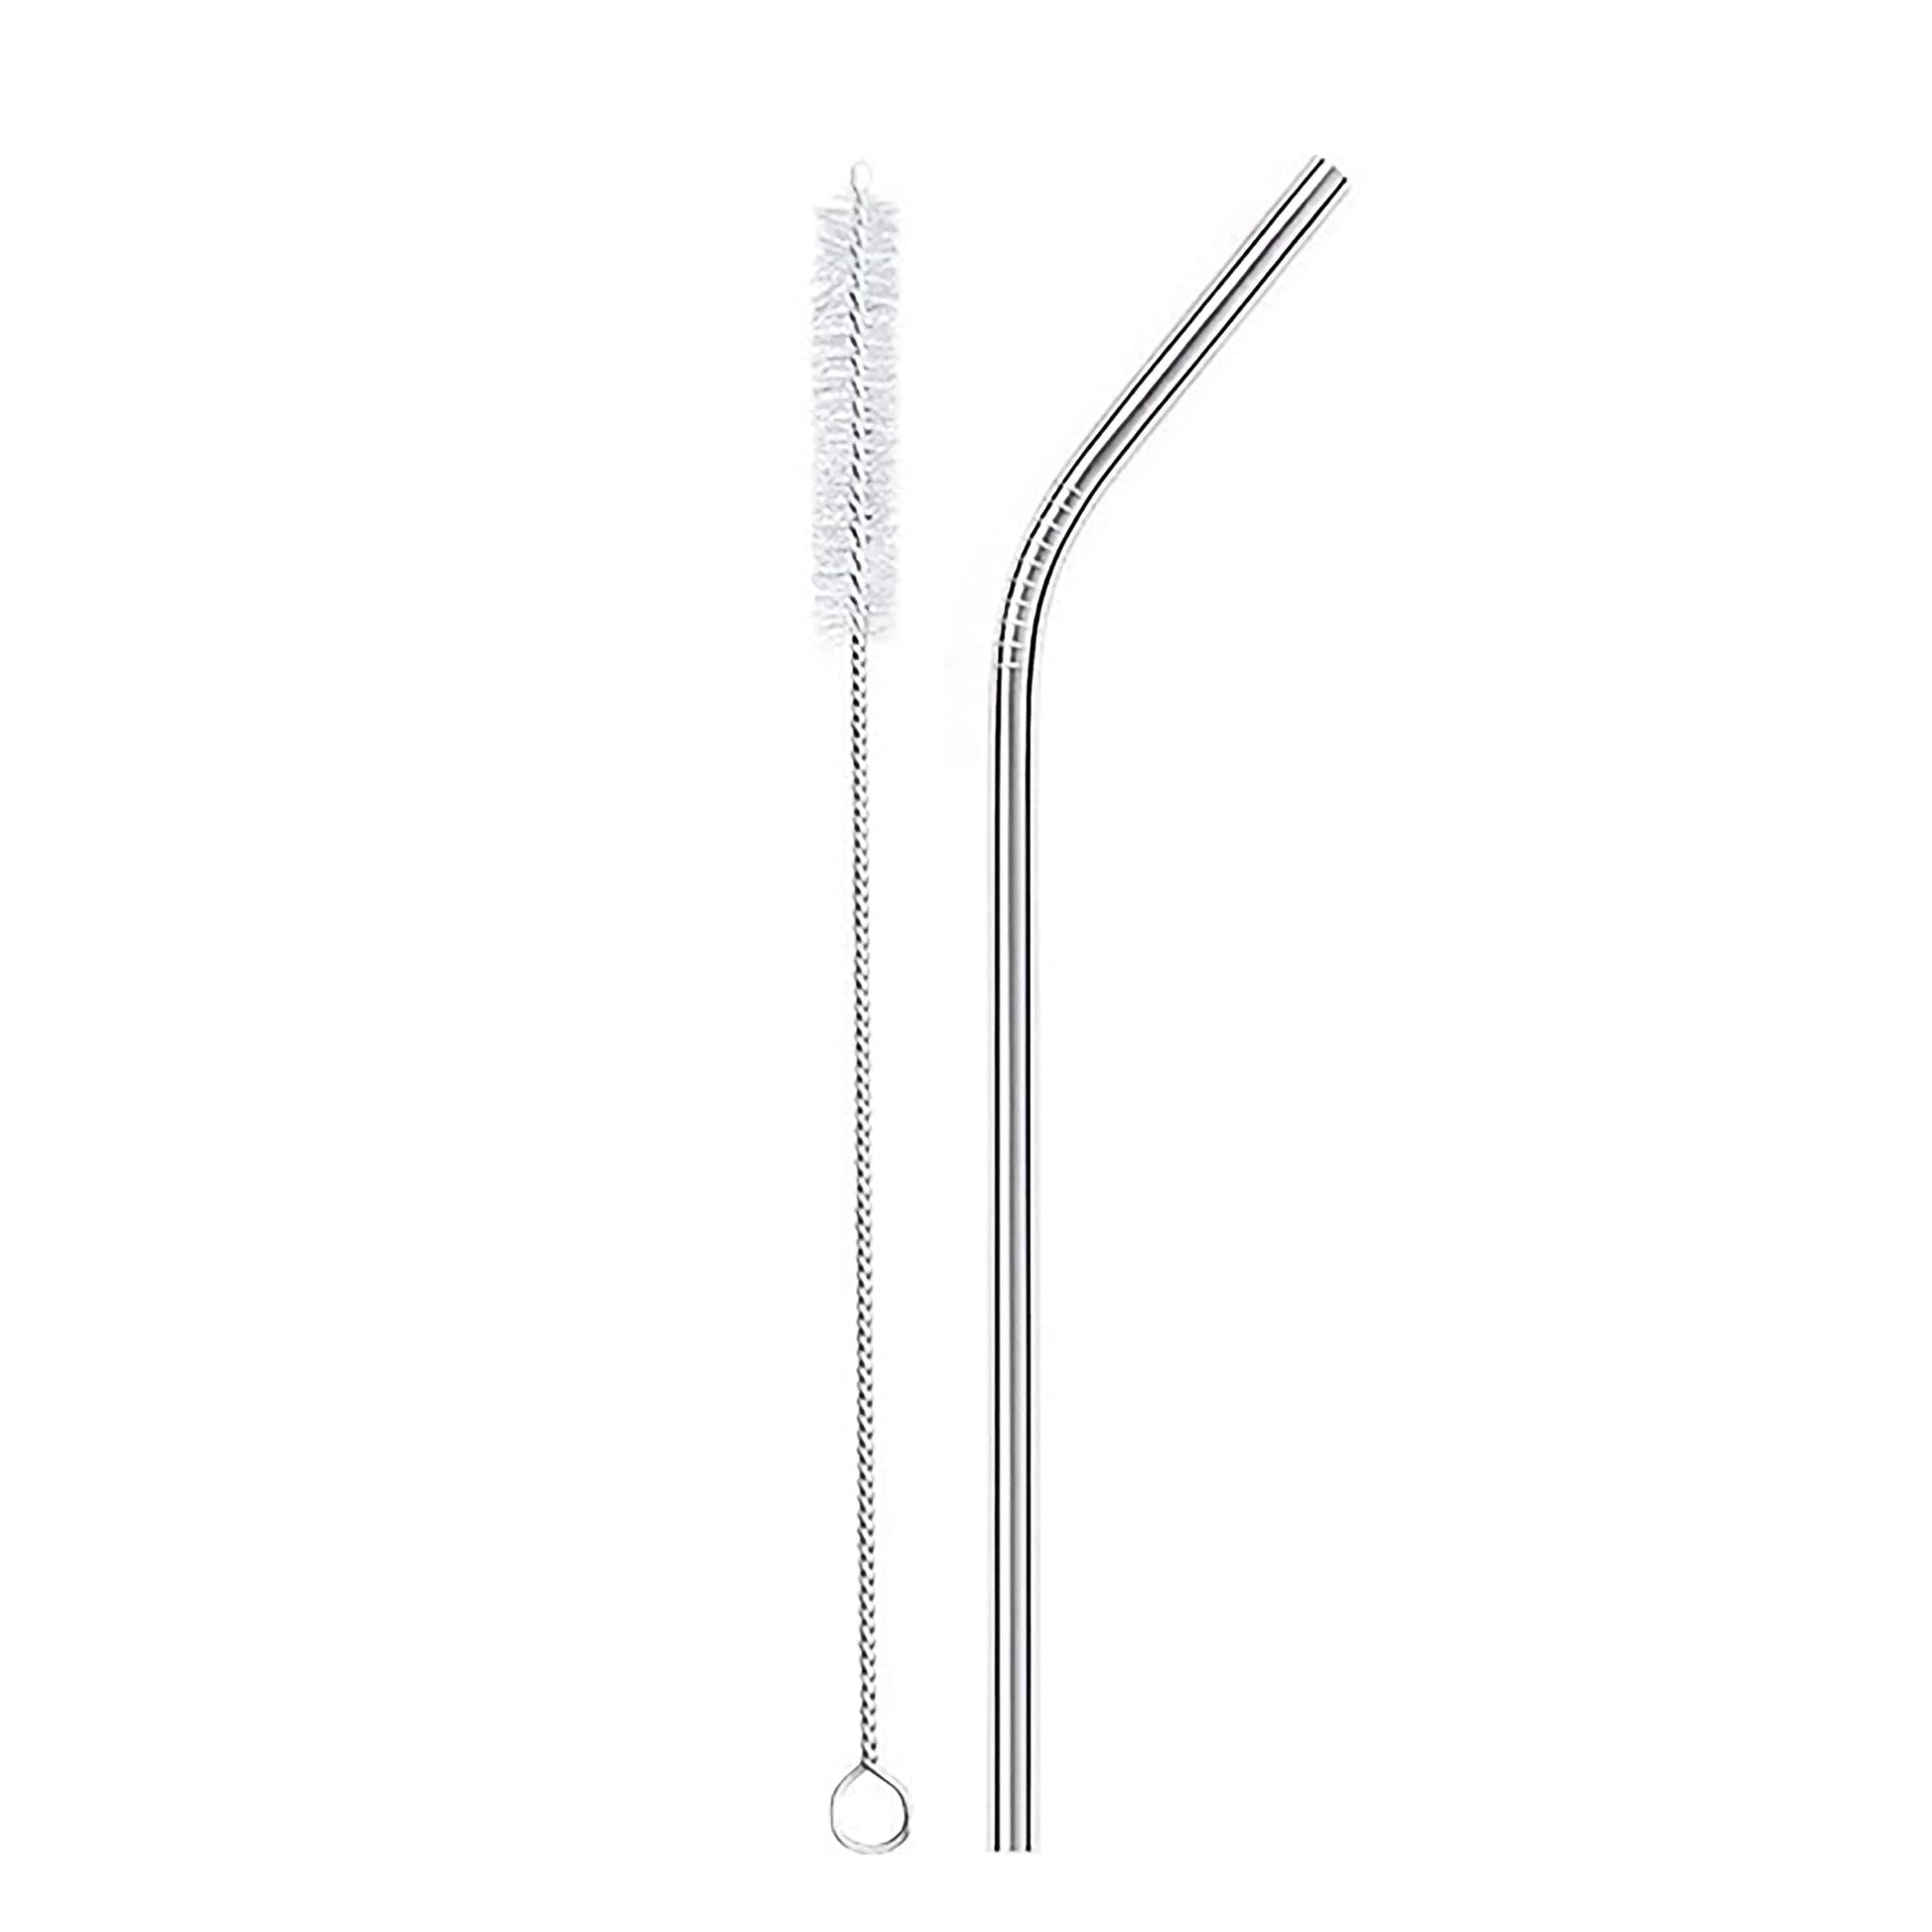 Meals In Steel Stainless Steel Smoothie Straw Pack with Vegan Brush - LunchBox Inc.